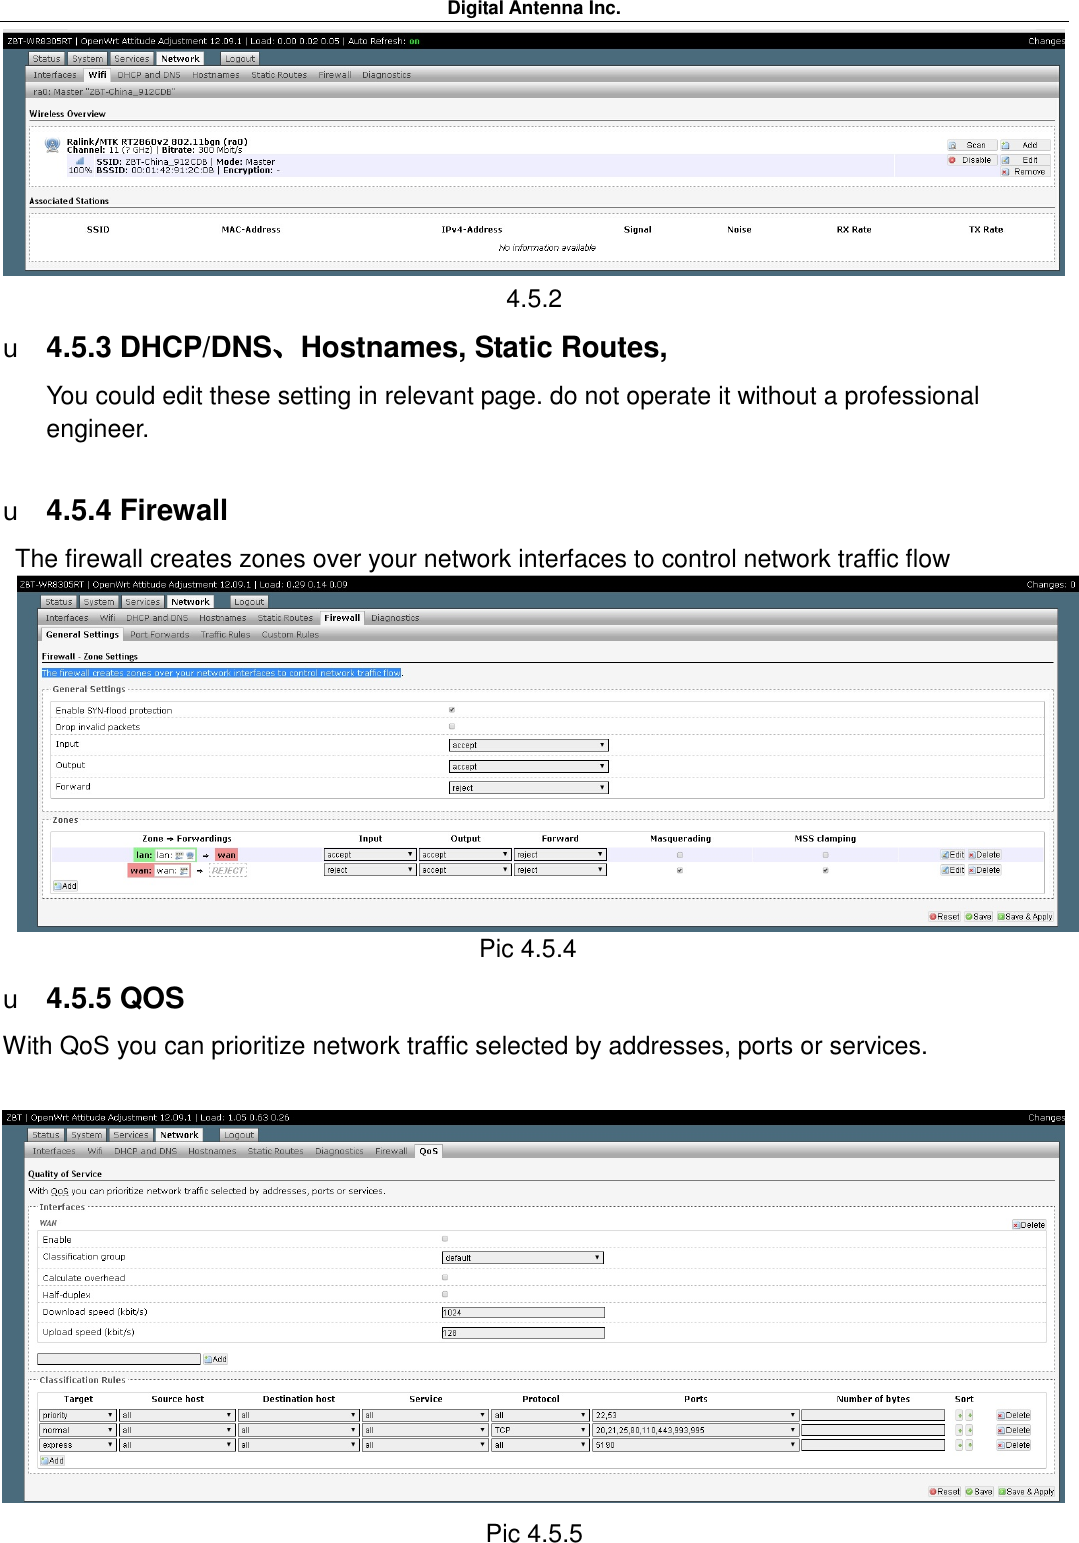 Digital Antenna Inc.                                                                                              4.5.2 u 4.5.3 DHCP/DNS、Hostnames, Static Routes,   You could edit these setting in relevant page. do not operate it without a professional engineer.      u 4.5.4 Firewall The firewall creates zones over your network interfaces to control network traffic flow  Pic 4.5.4  u 4.5.5 QOS With QoS you can prioritize network traffic selected by addresses, ports or services.           Pic 4.5.5 